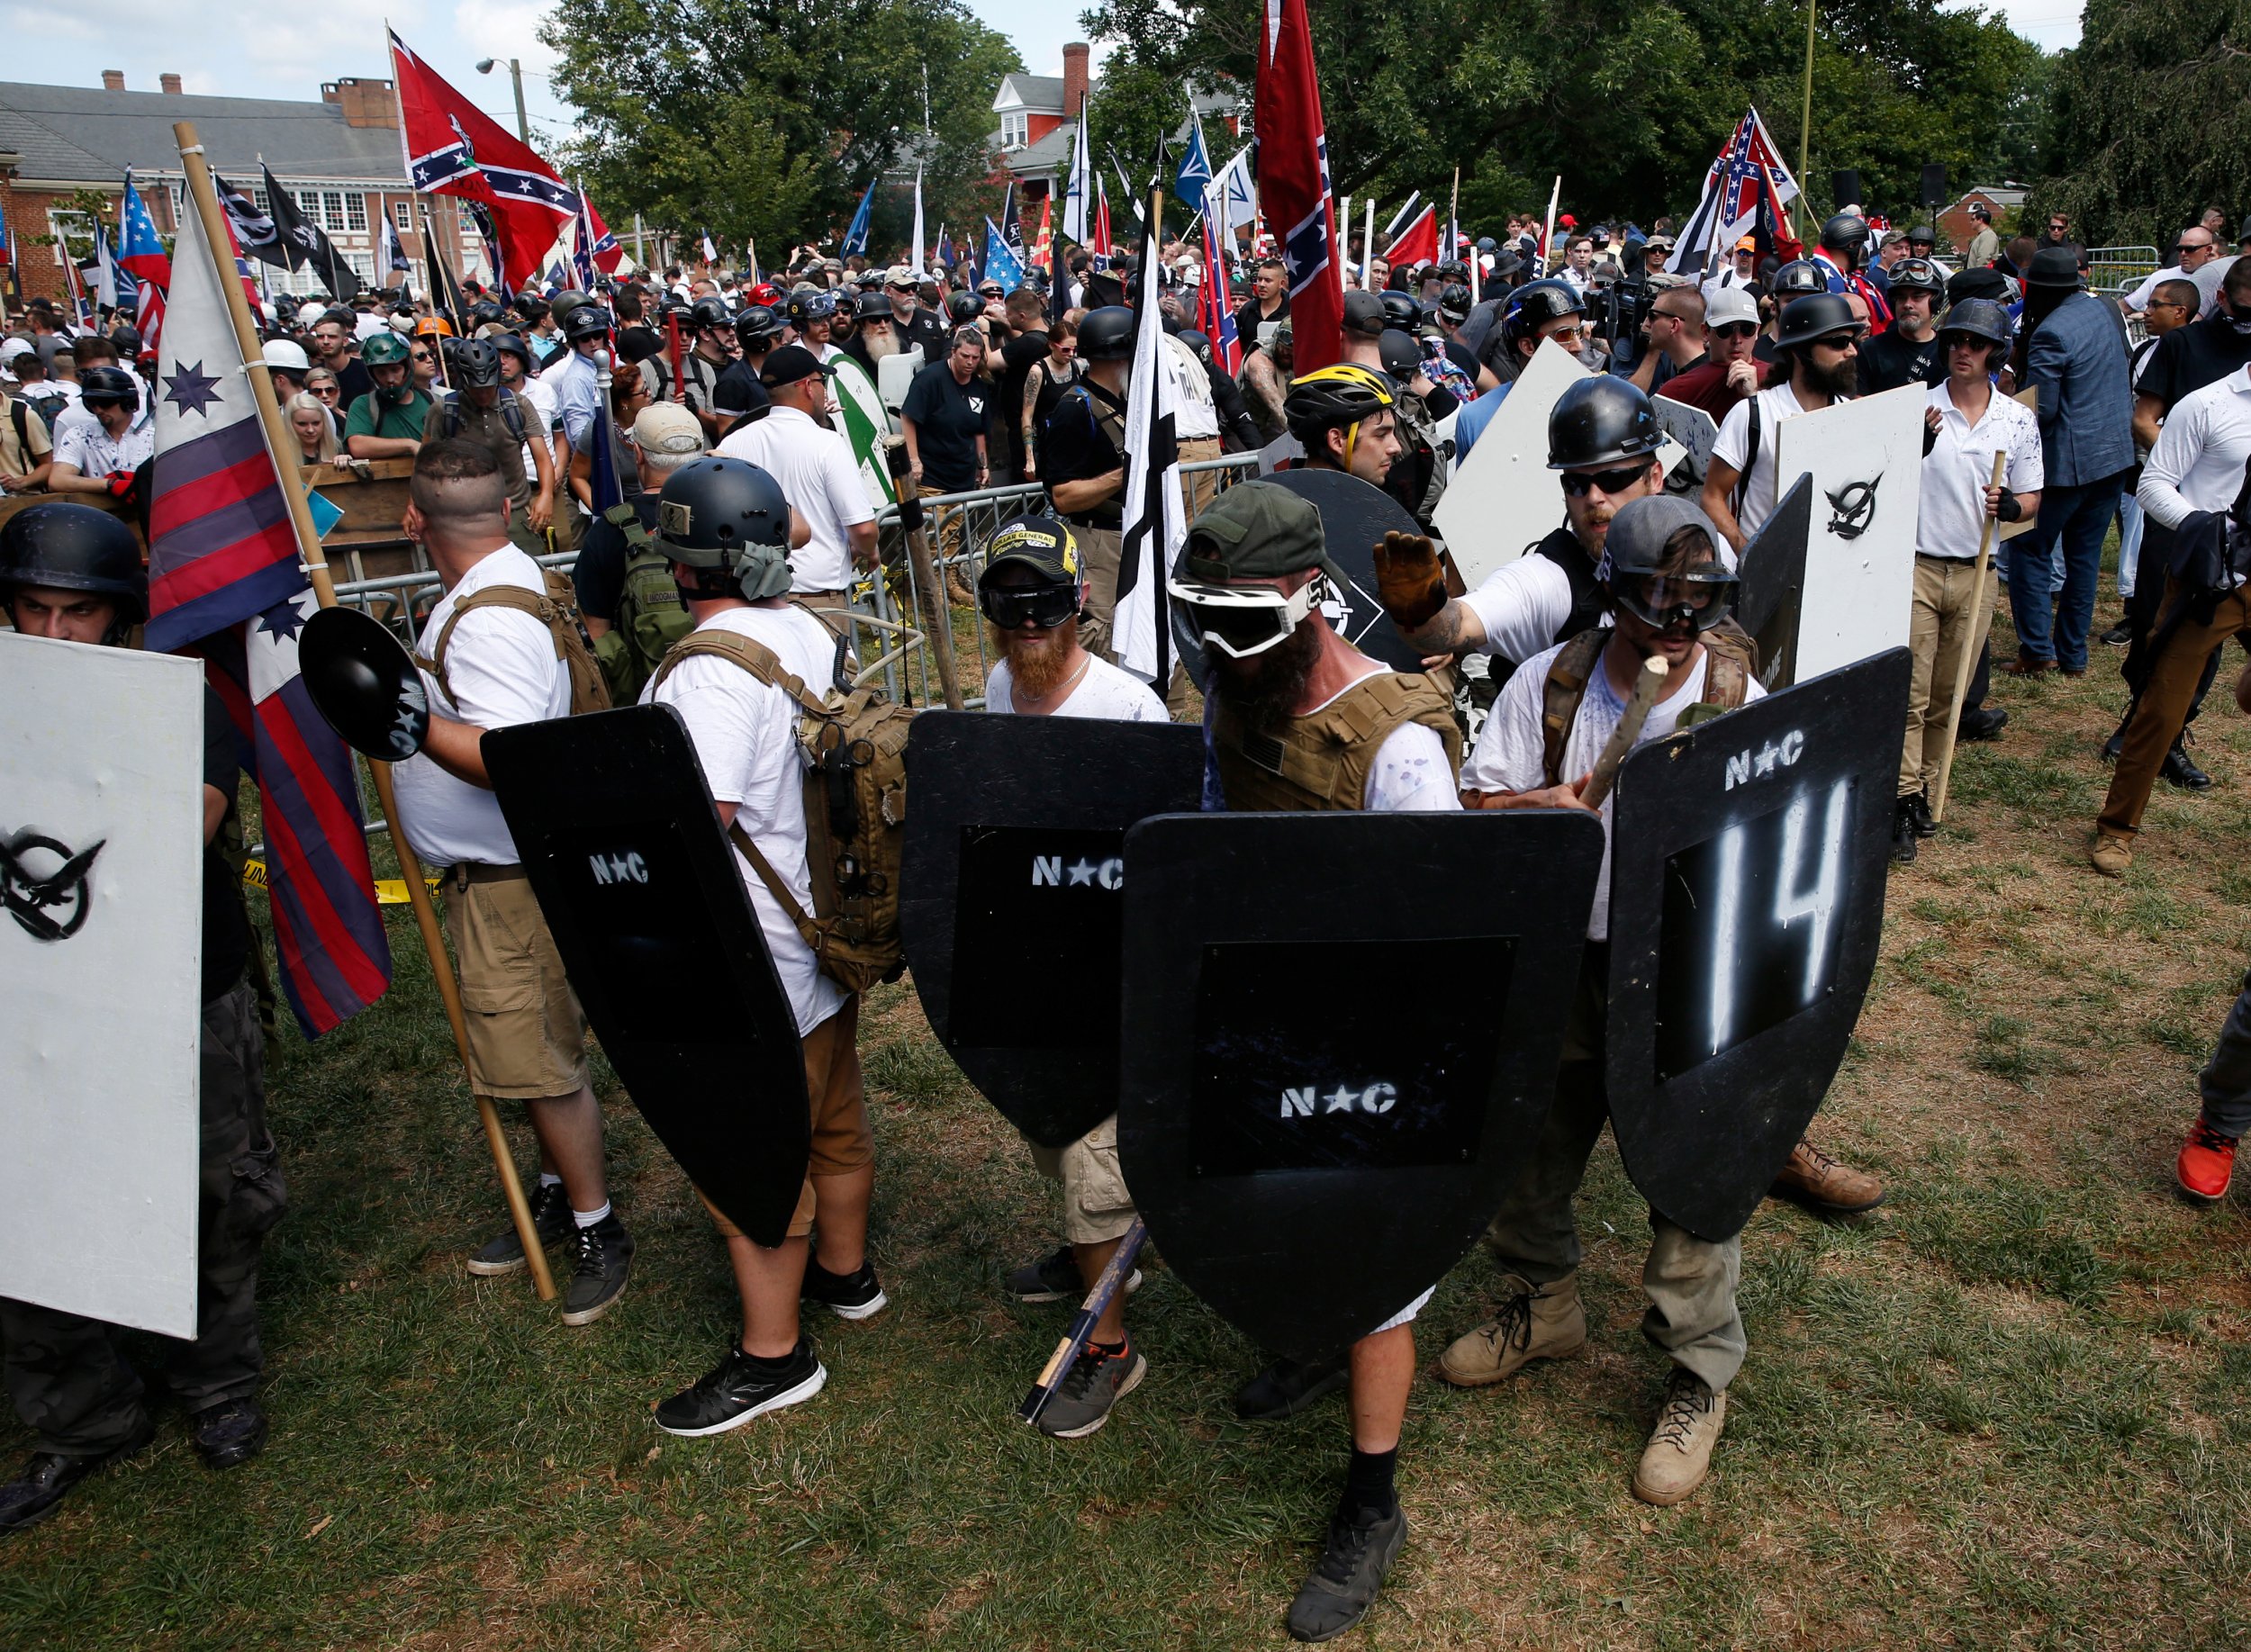 White nationalists in Charlottesville, Virginia